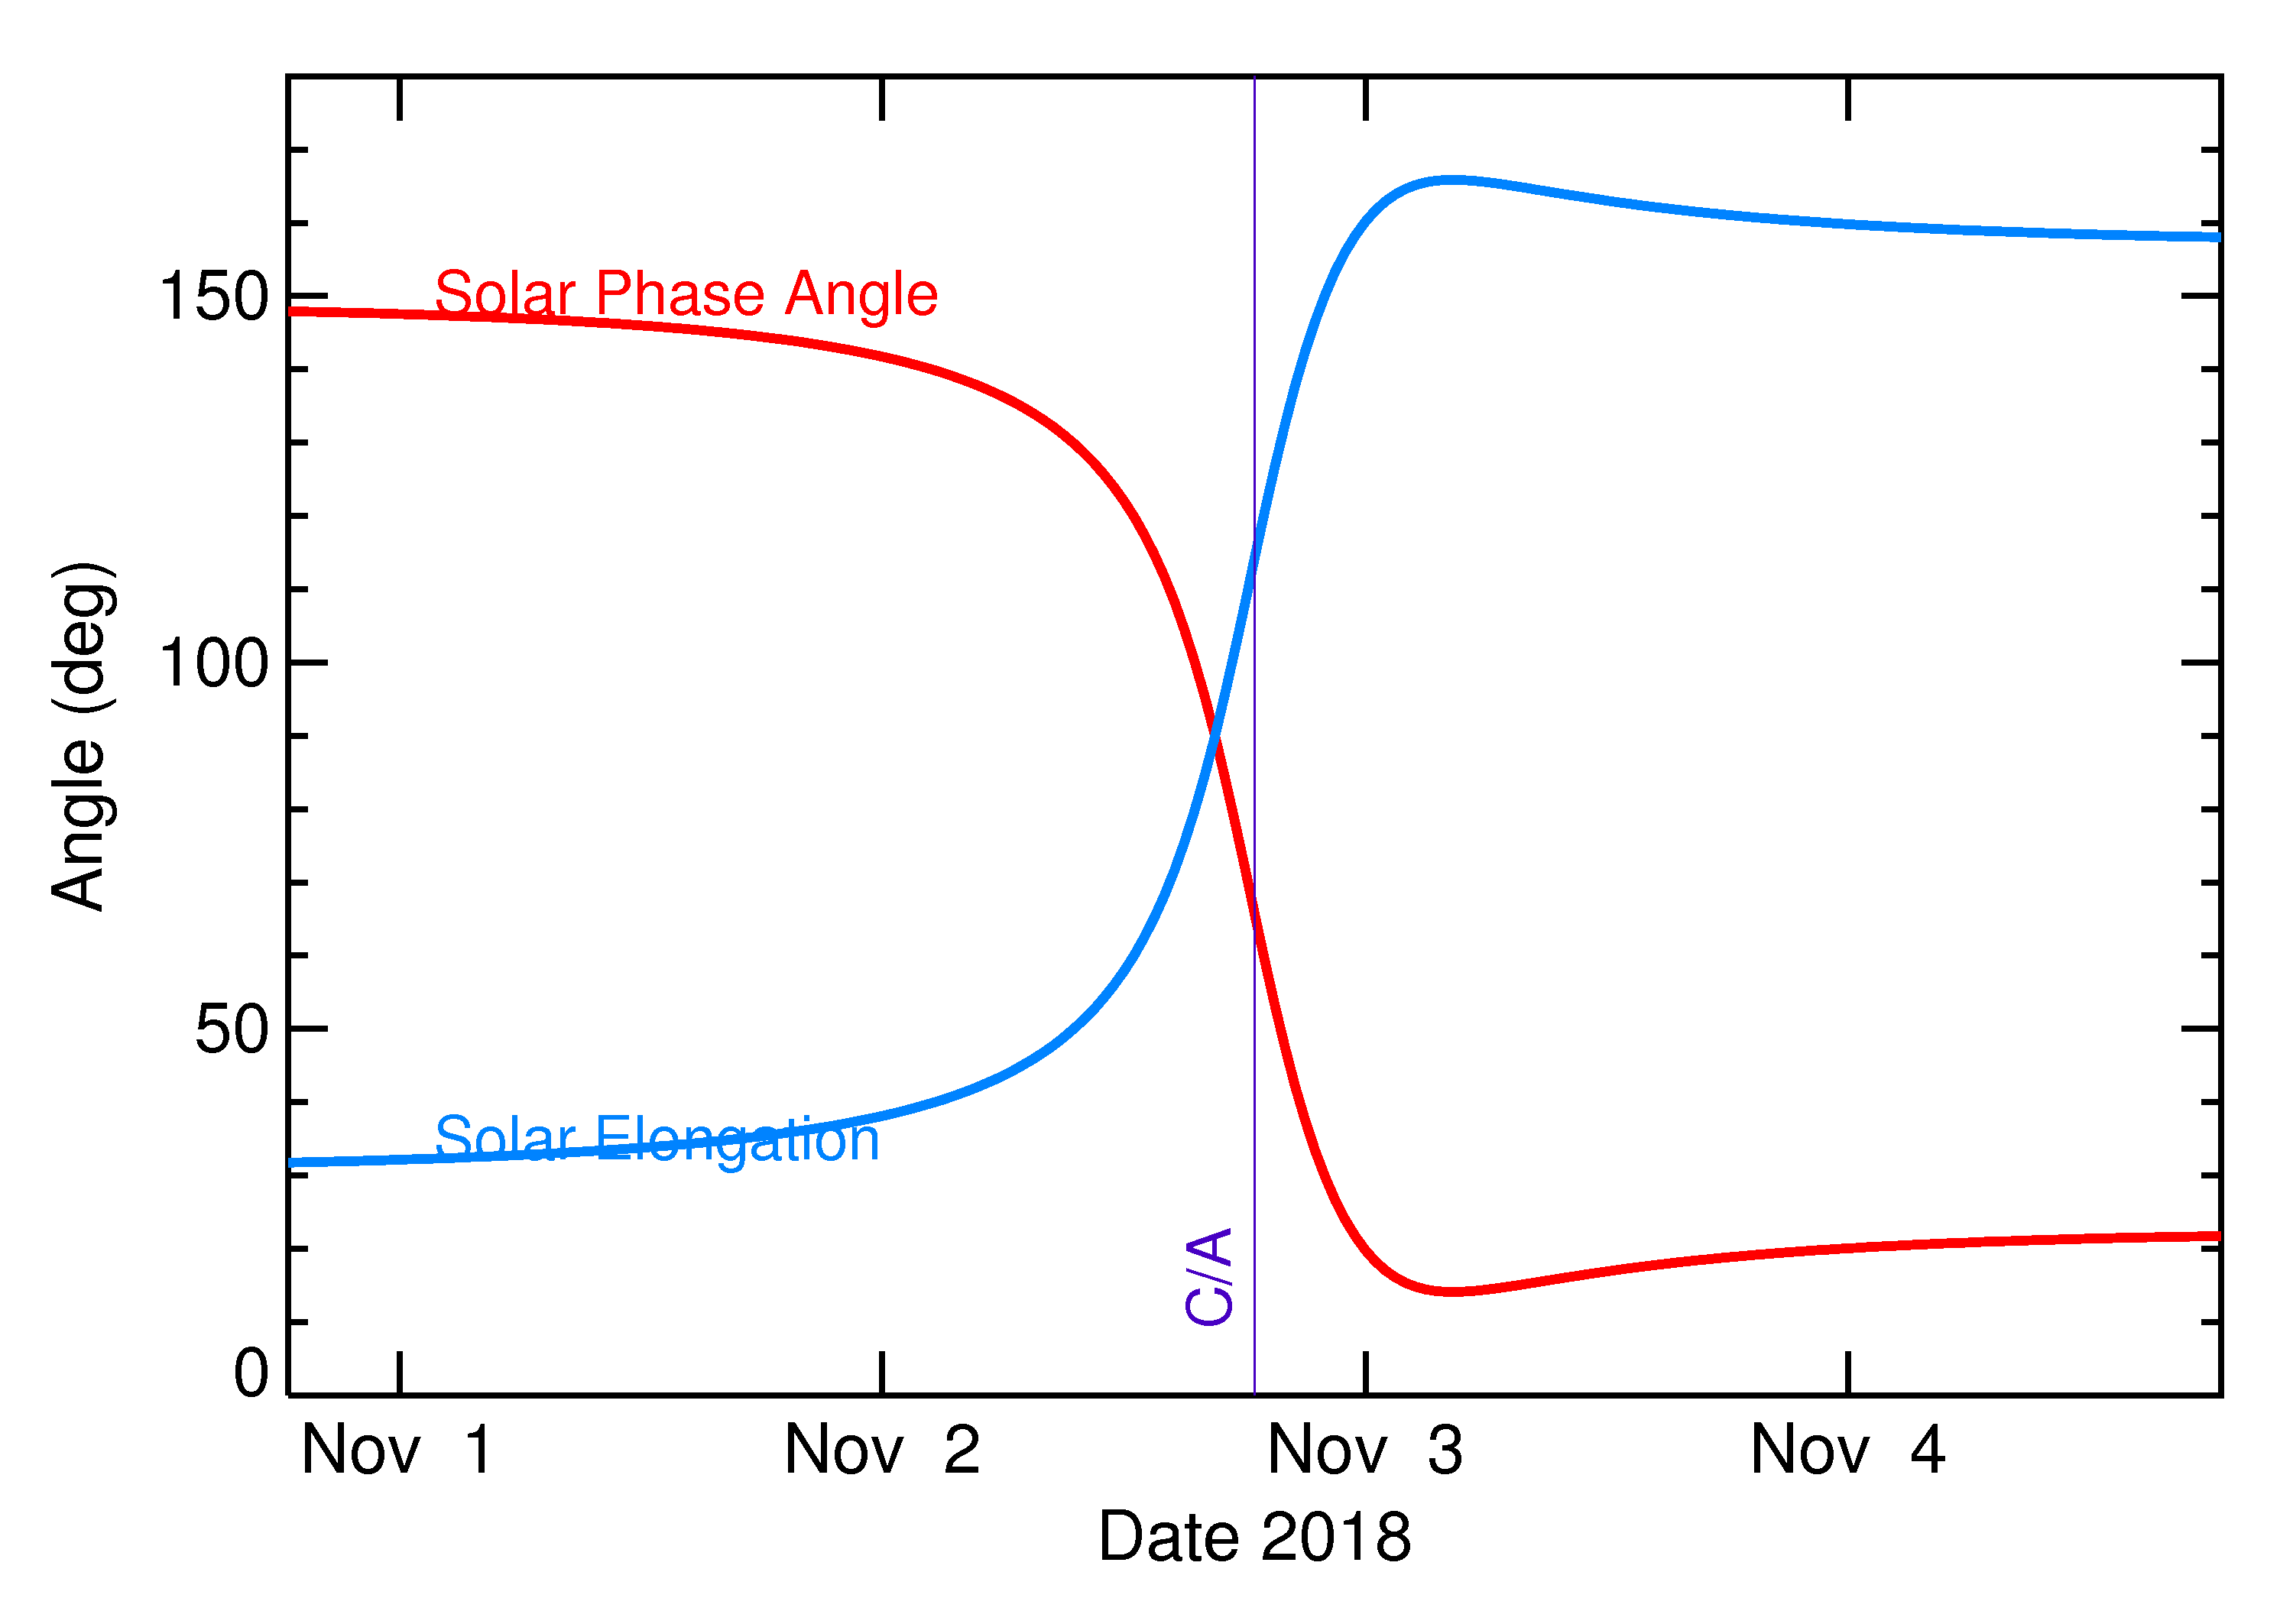 Solar Elongation and Solar Phase Angle of 2018 VP1 in the days around closest approach